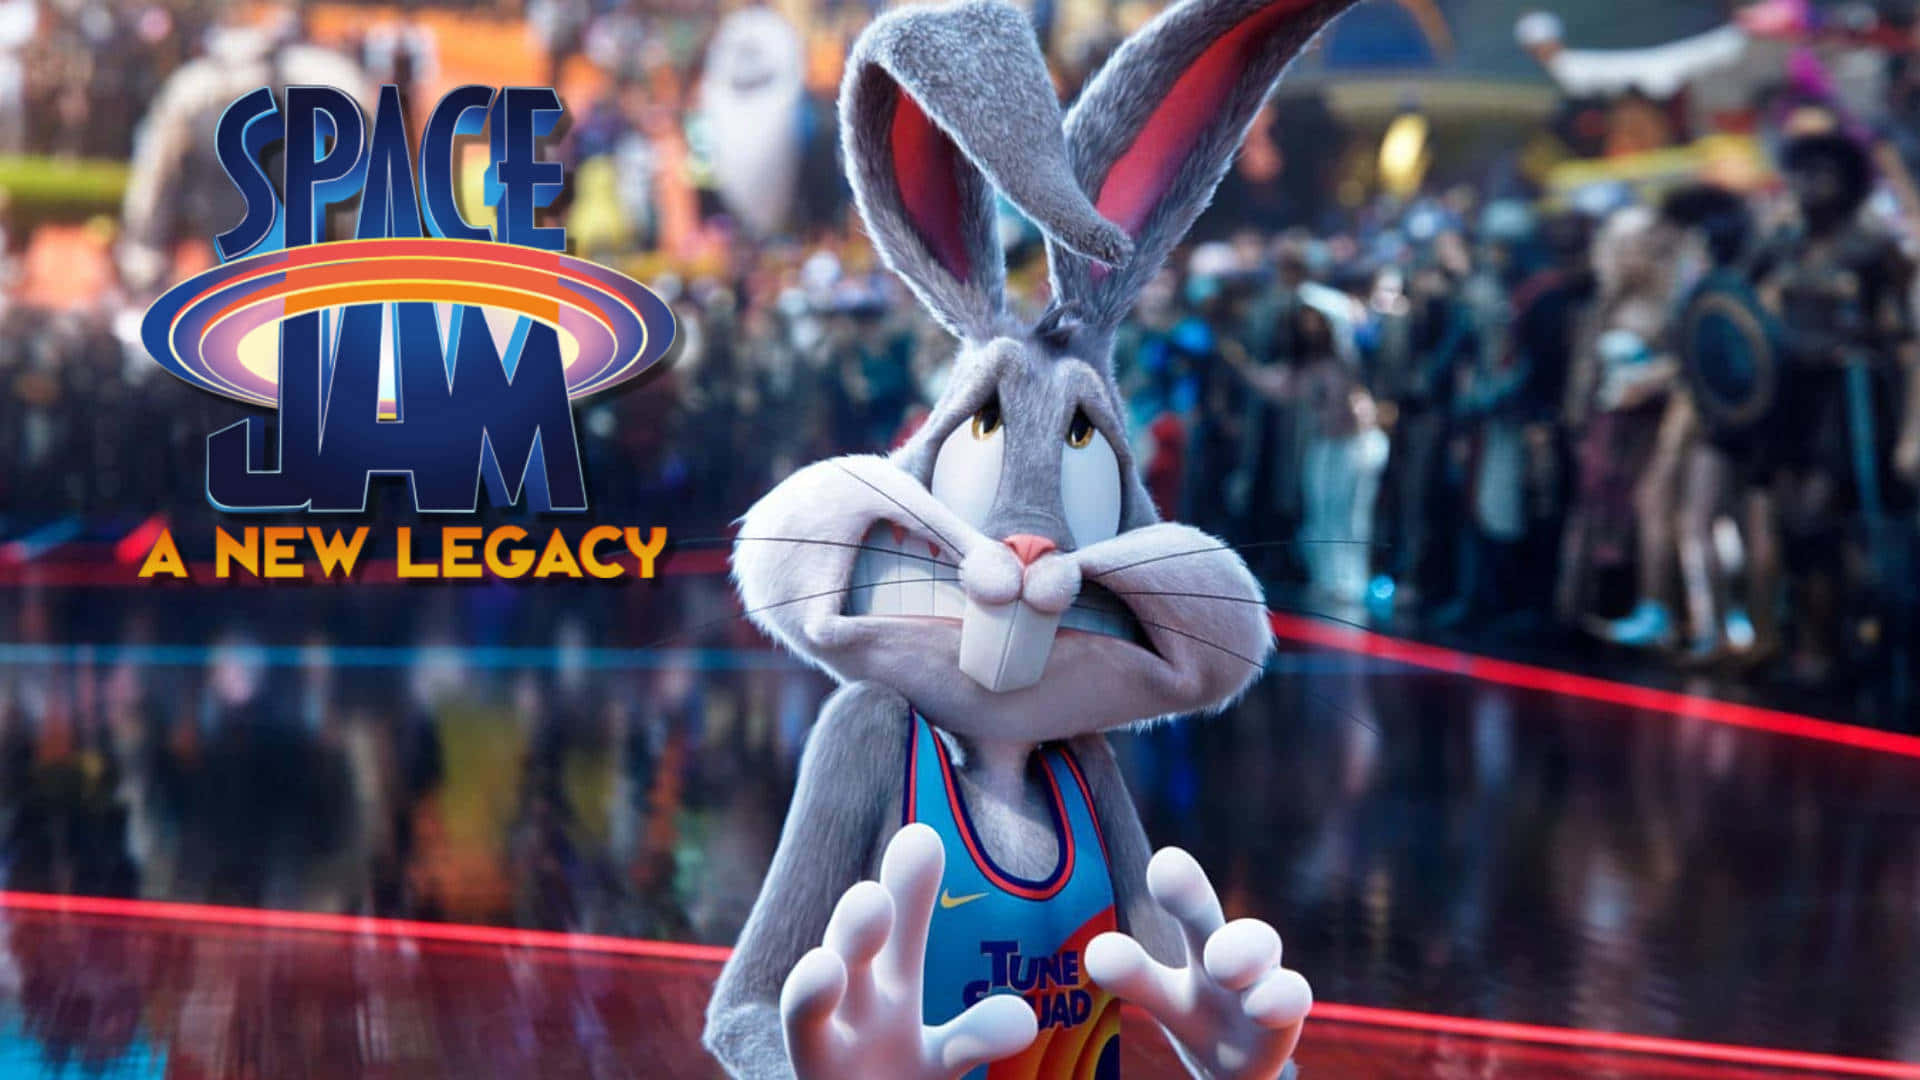 Bugs Bunny Cool Space Jam A New Legacy (in Swedish) Wallpaper